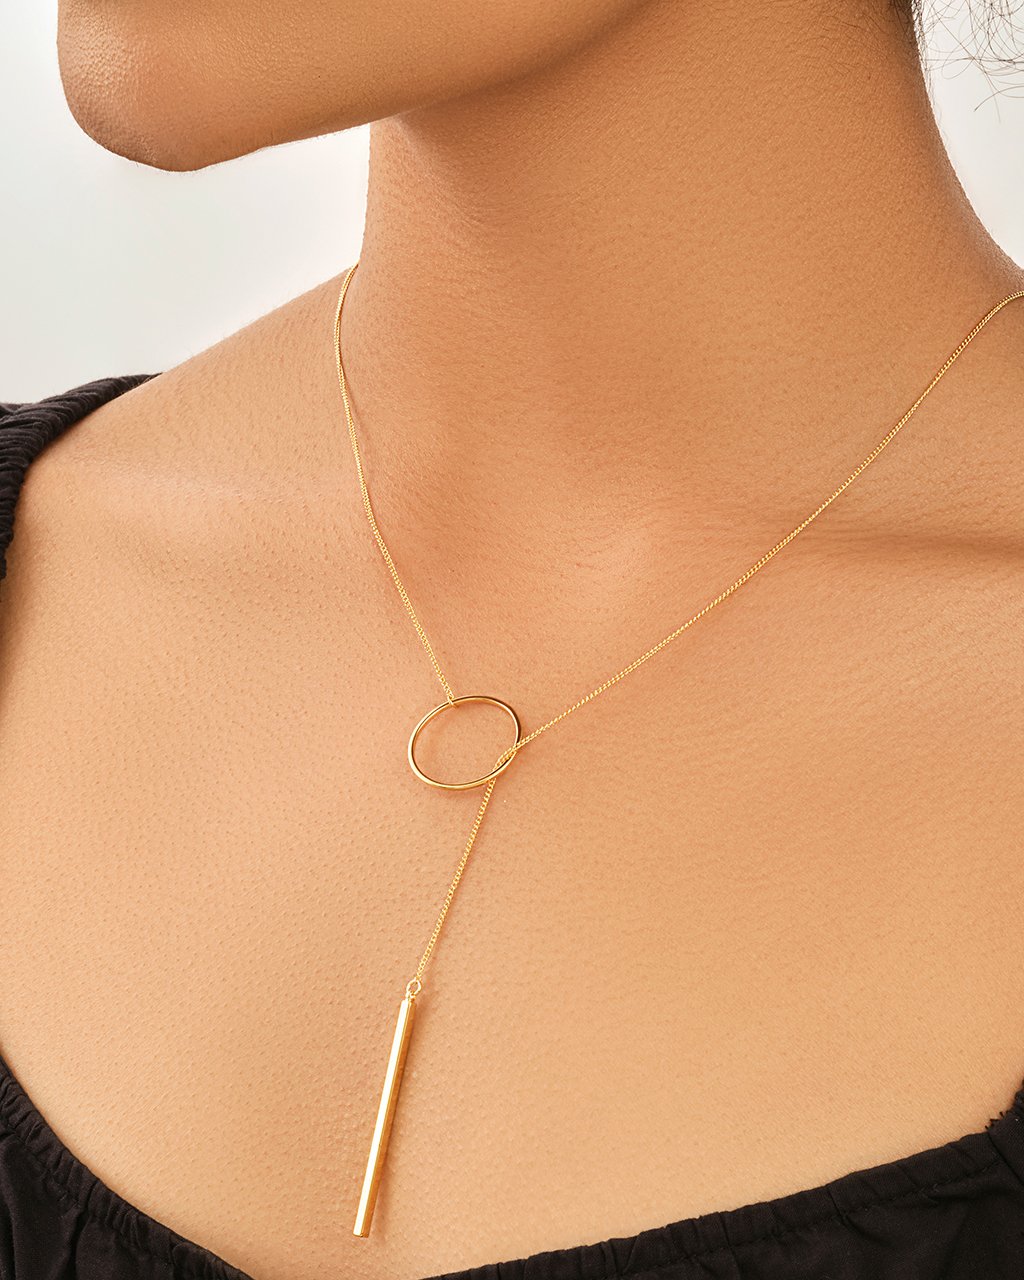 Layering Circle and Bar Lariat Necklace Necklace Sterling Forever 